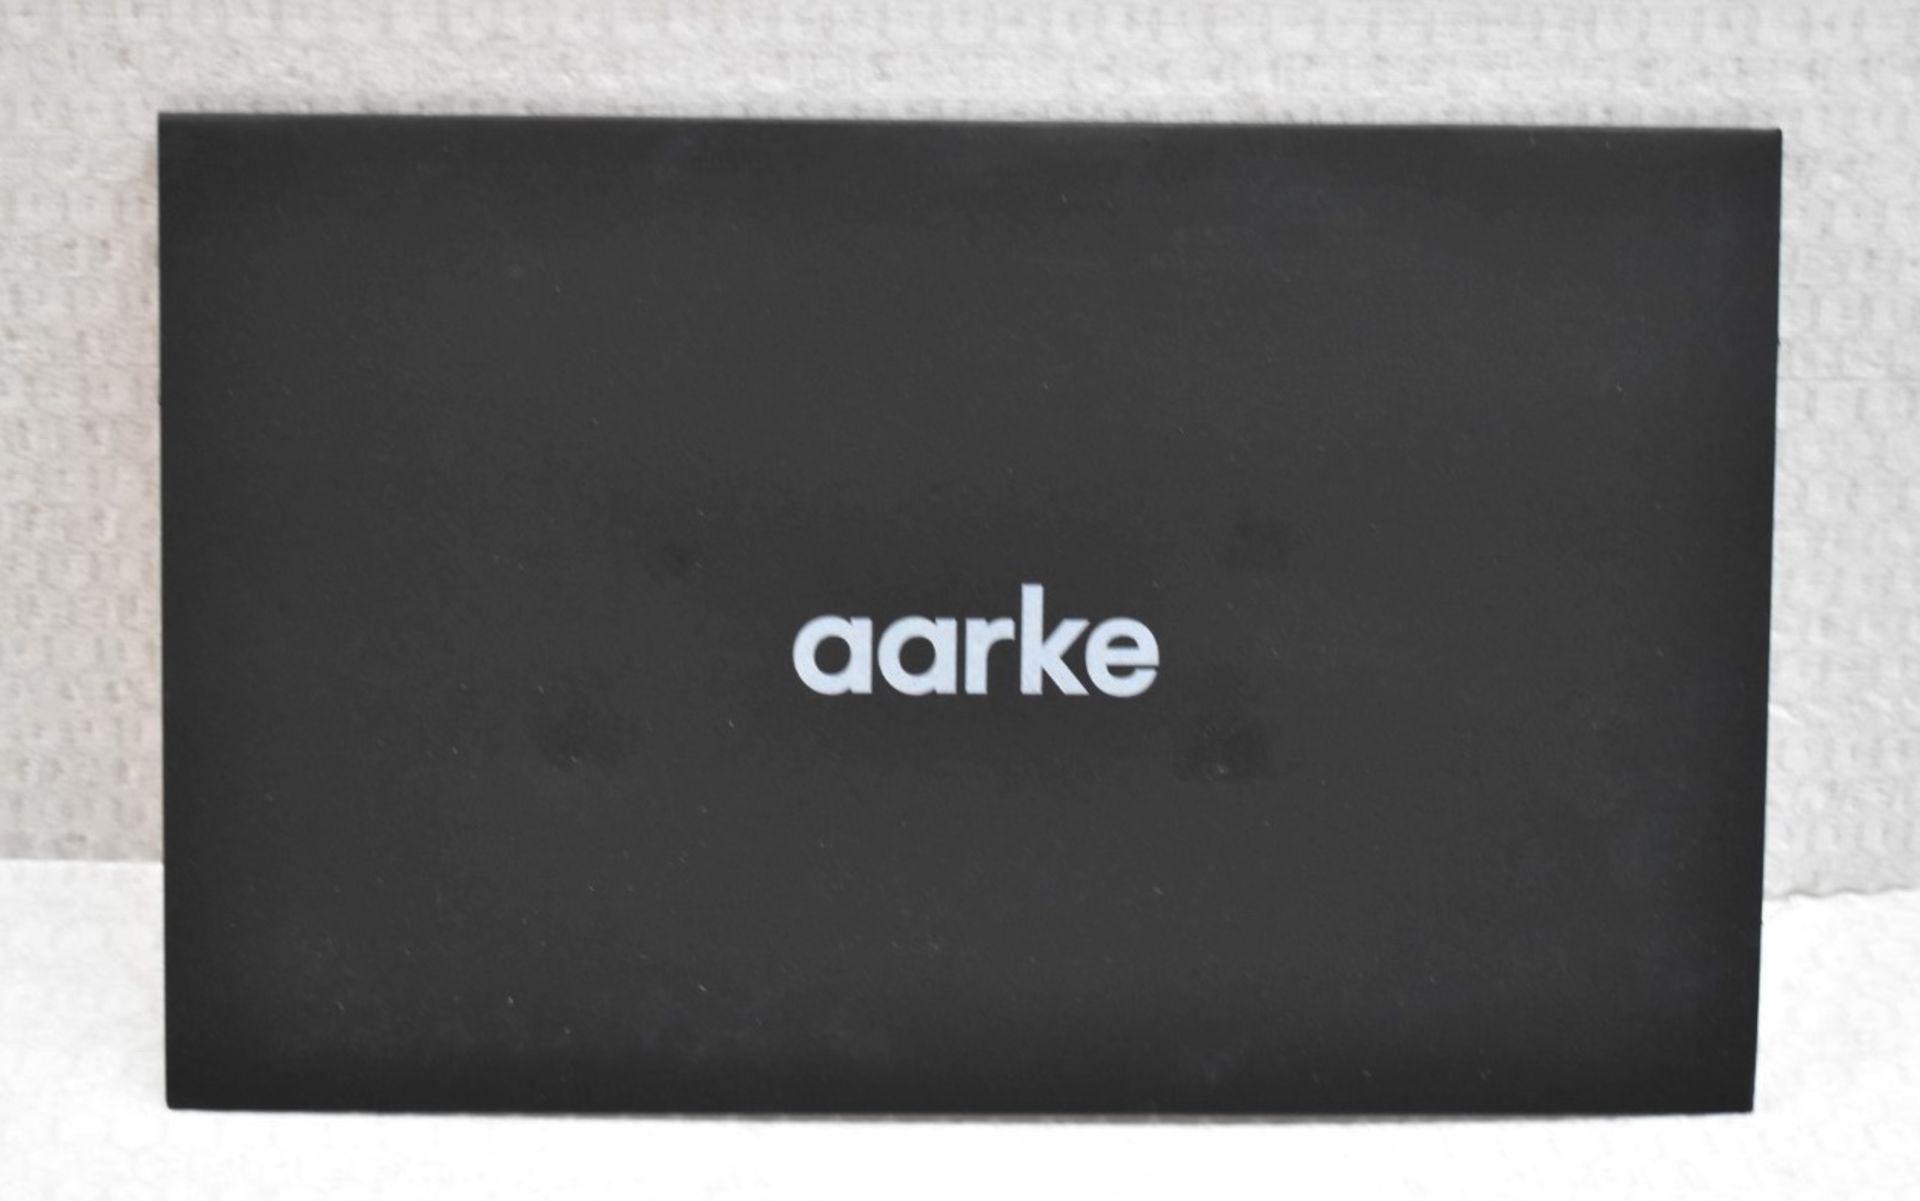 1 x AARKE Carbonator 3 With a Copper Finish - Original Price £179.00 - Unused Boxed Stock - Image 12 of 15